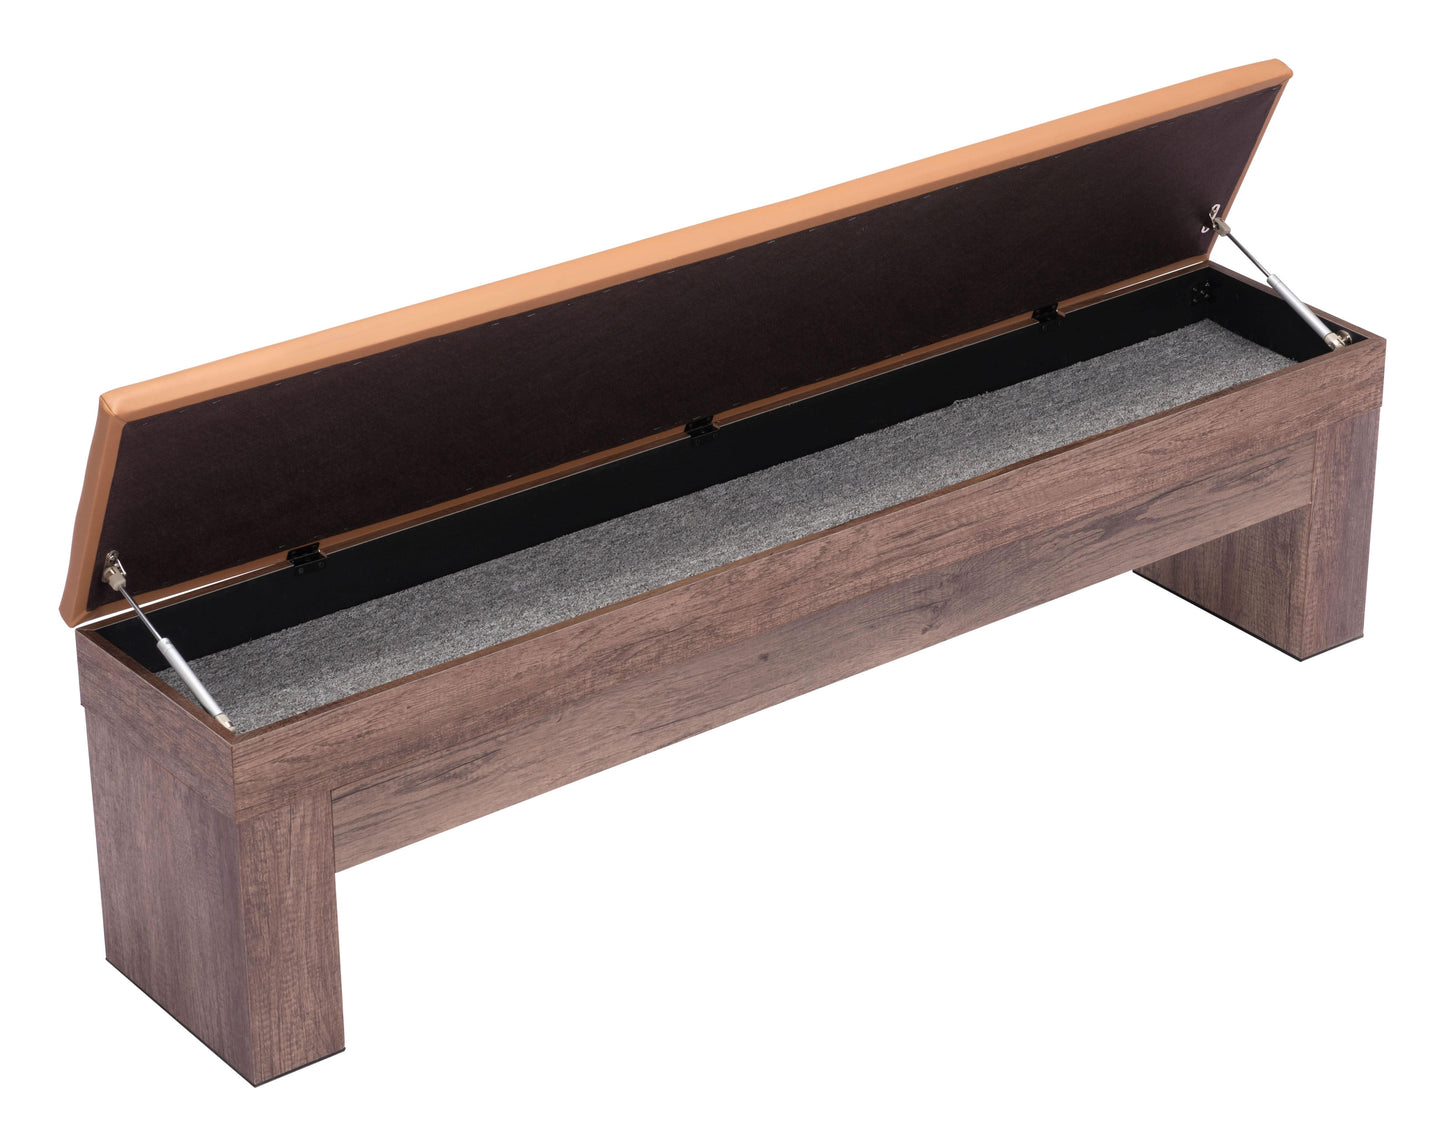 Storage compartment in bench